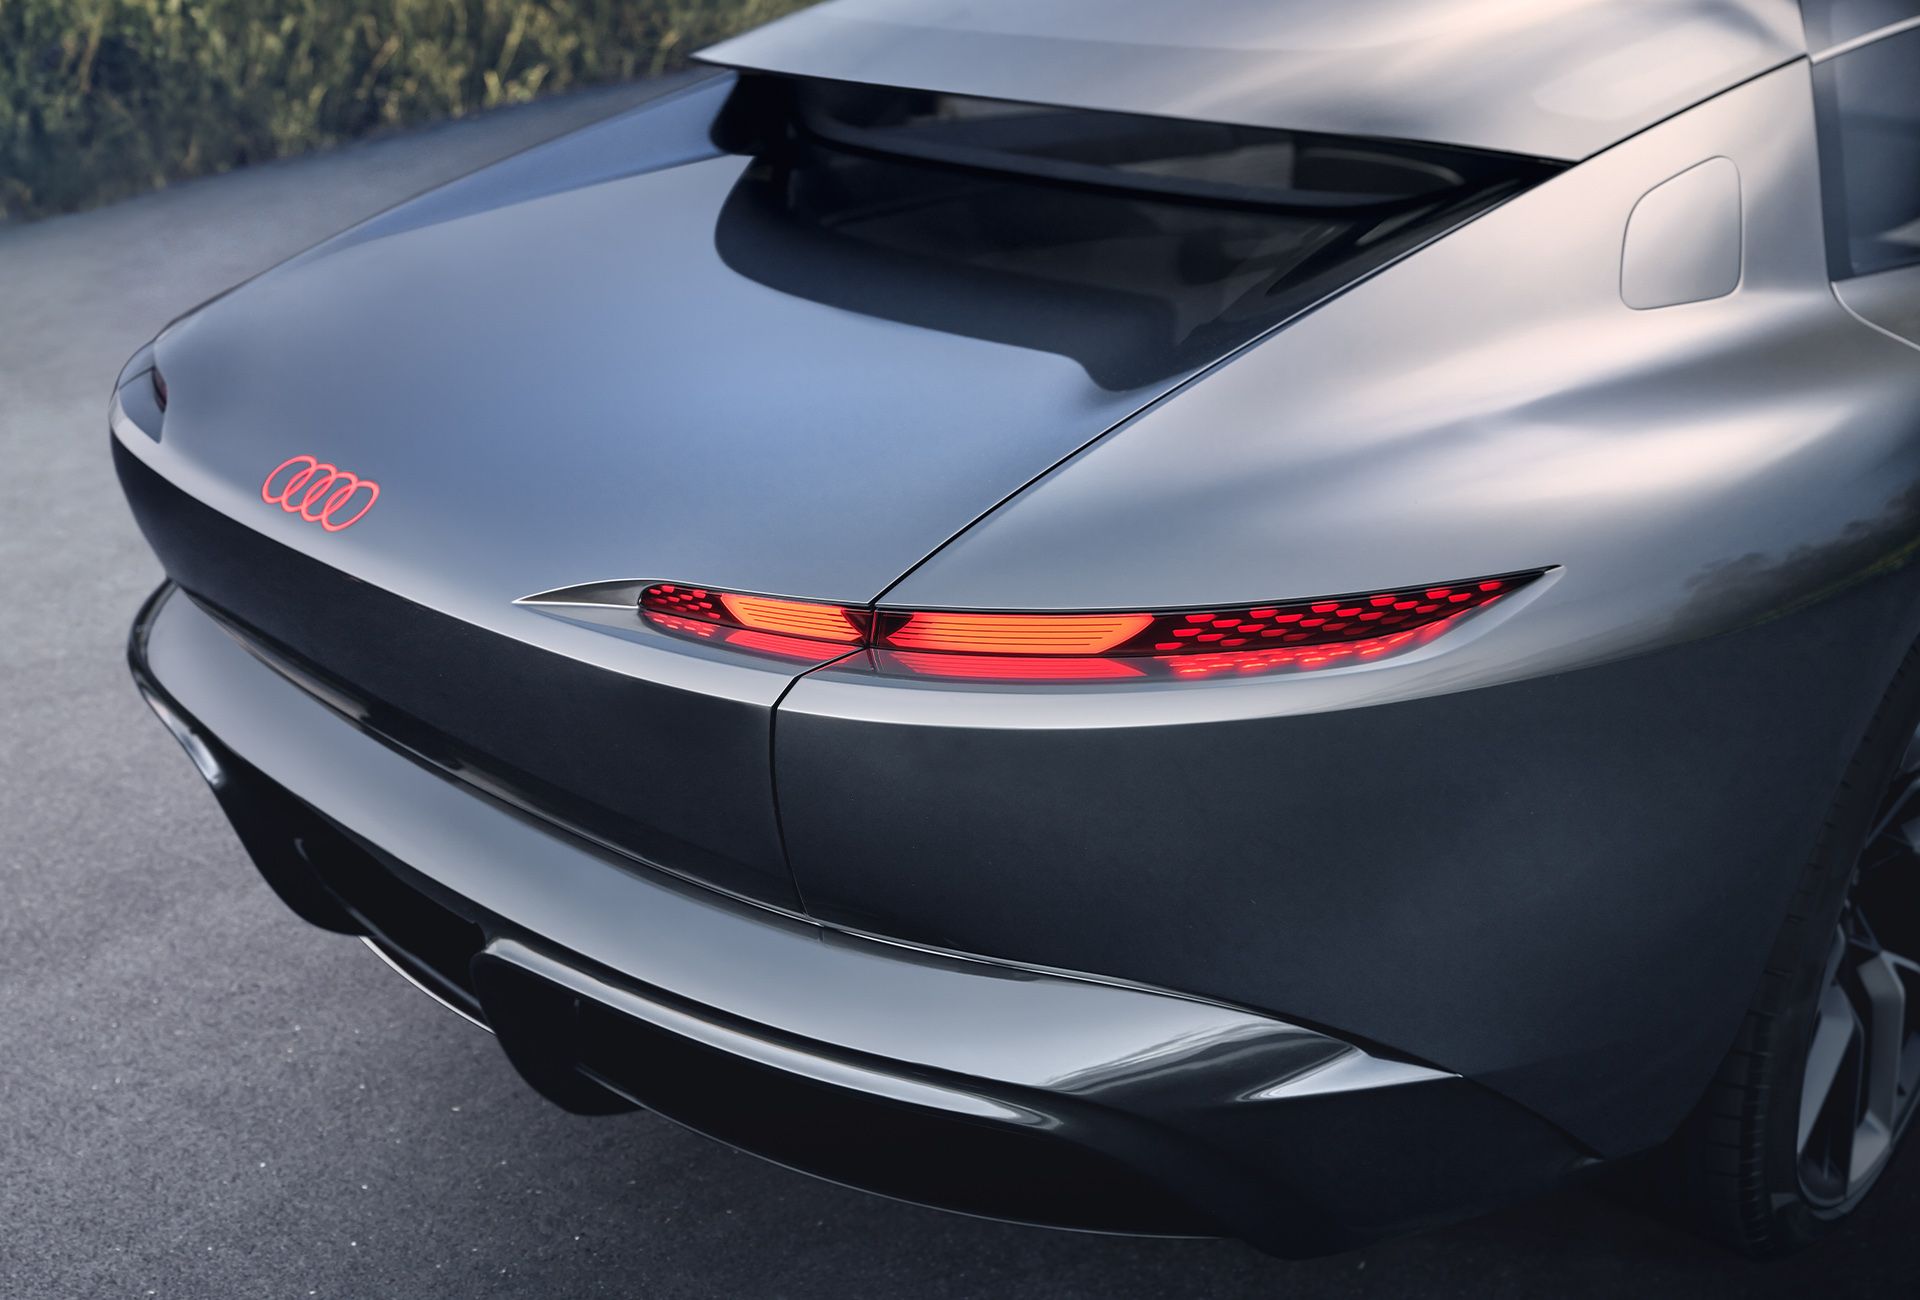 The rear of the Audi grandsphere concept¹.